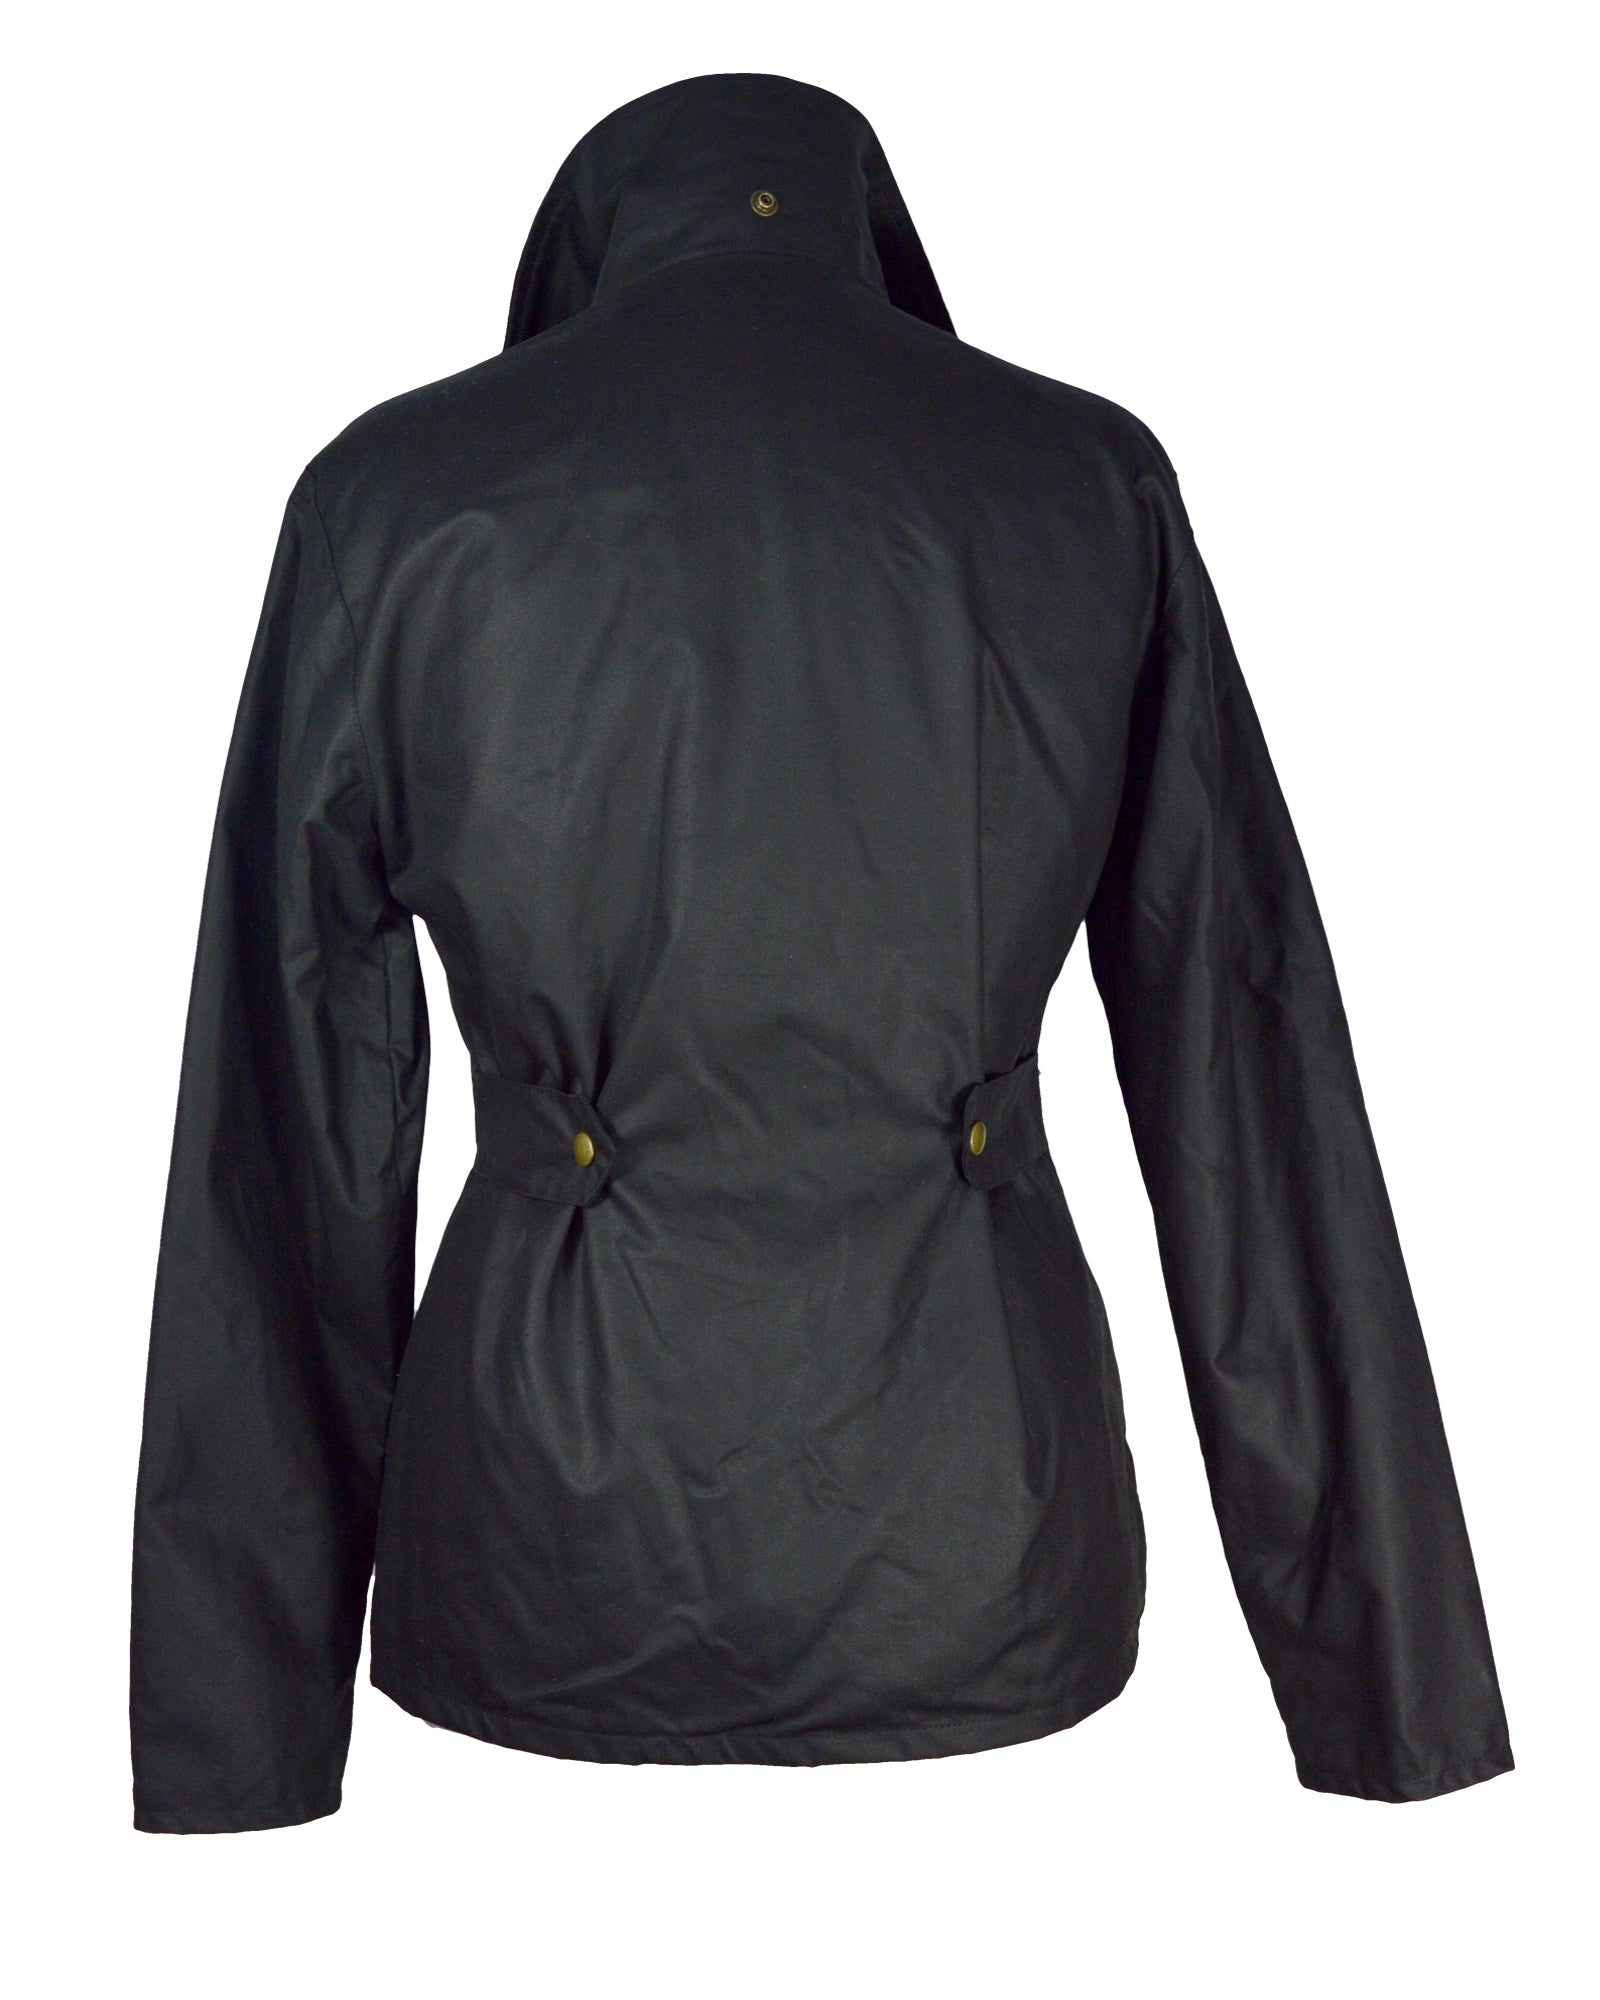 Regents View Womens Premium Fitted 100% Waxed Cotton Jacket - Black